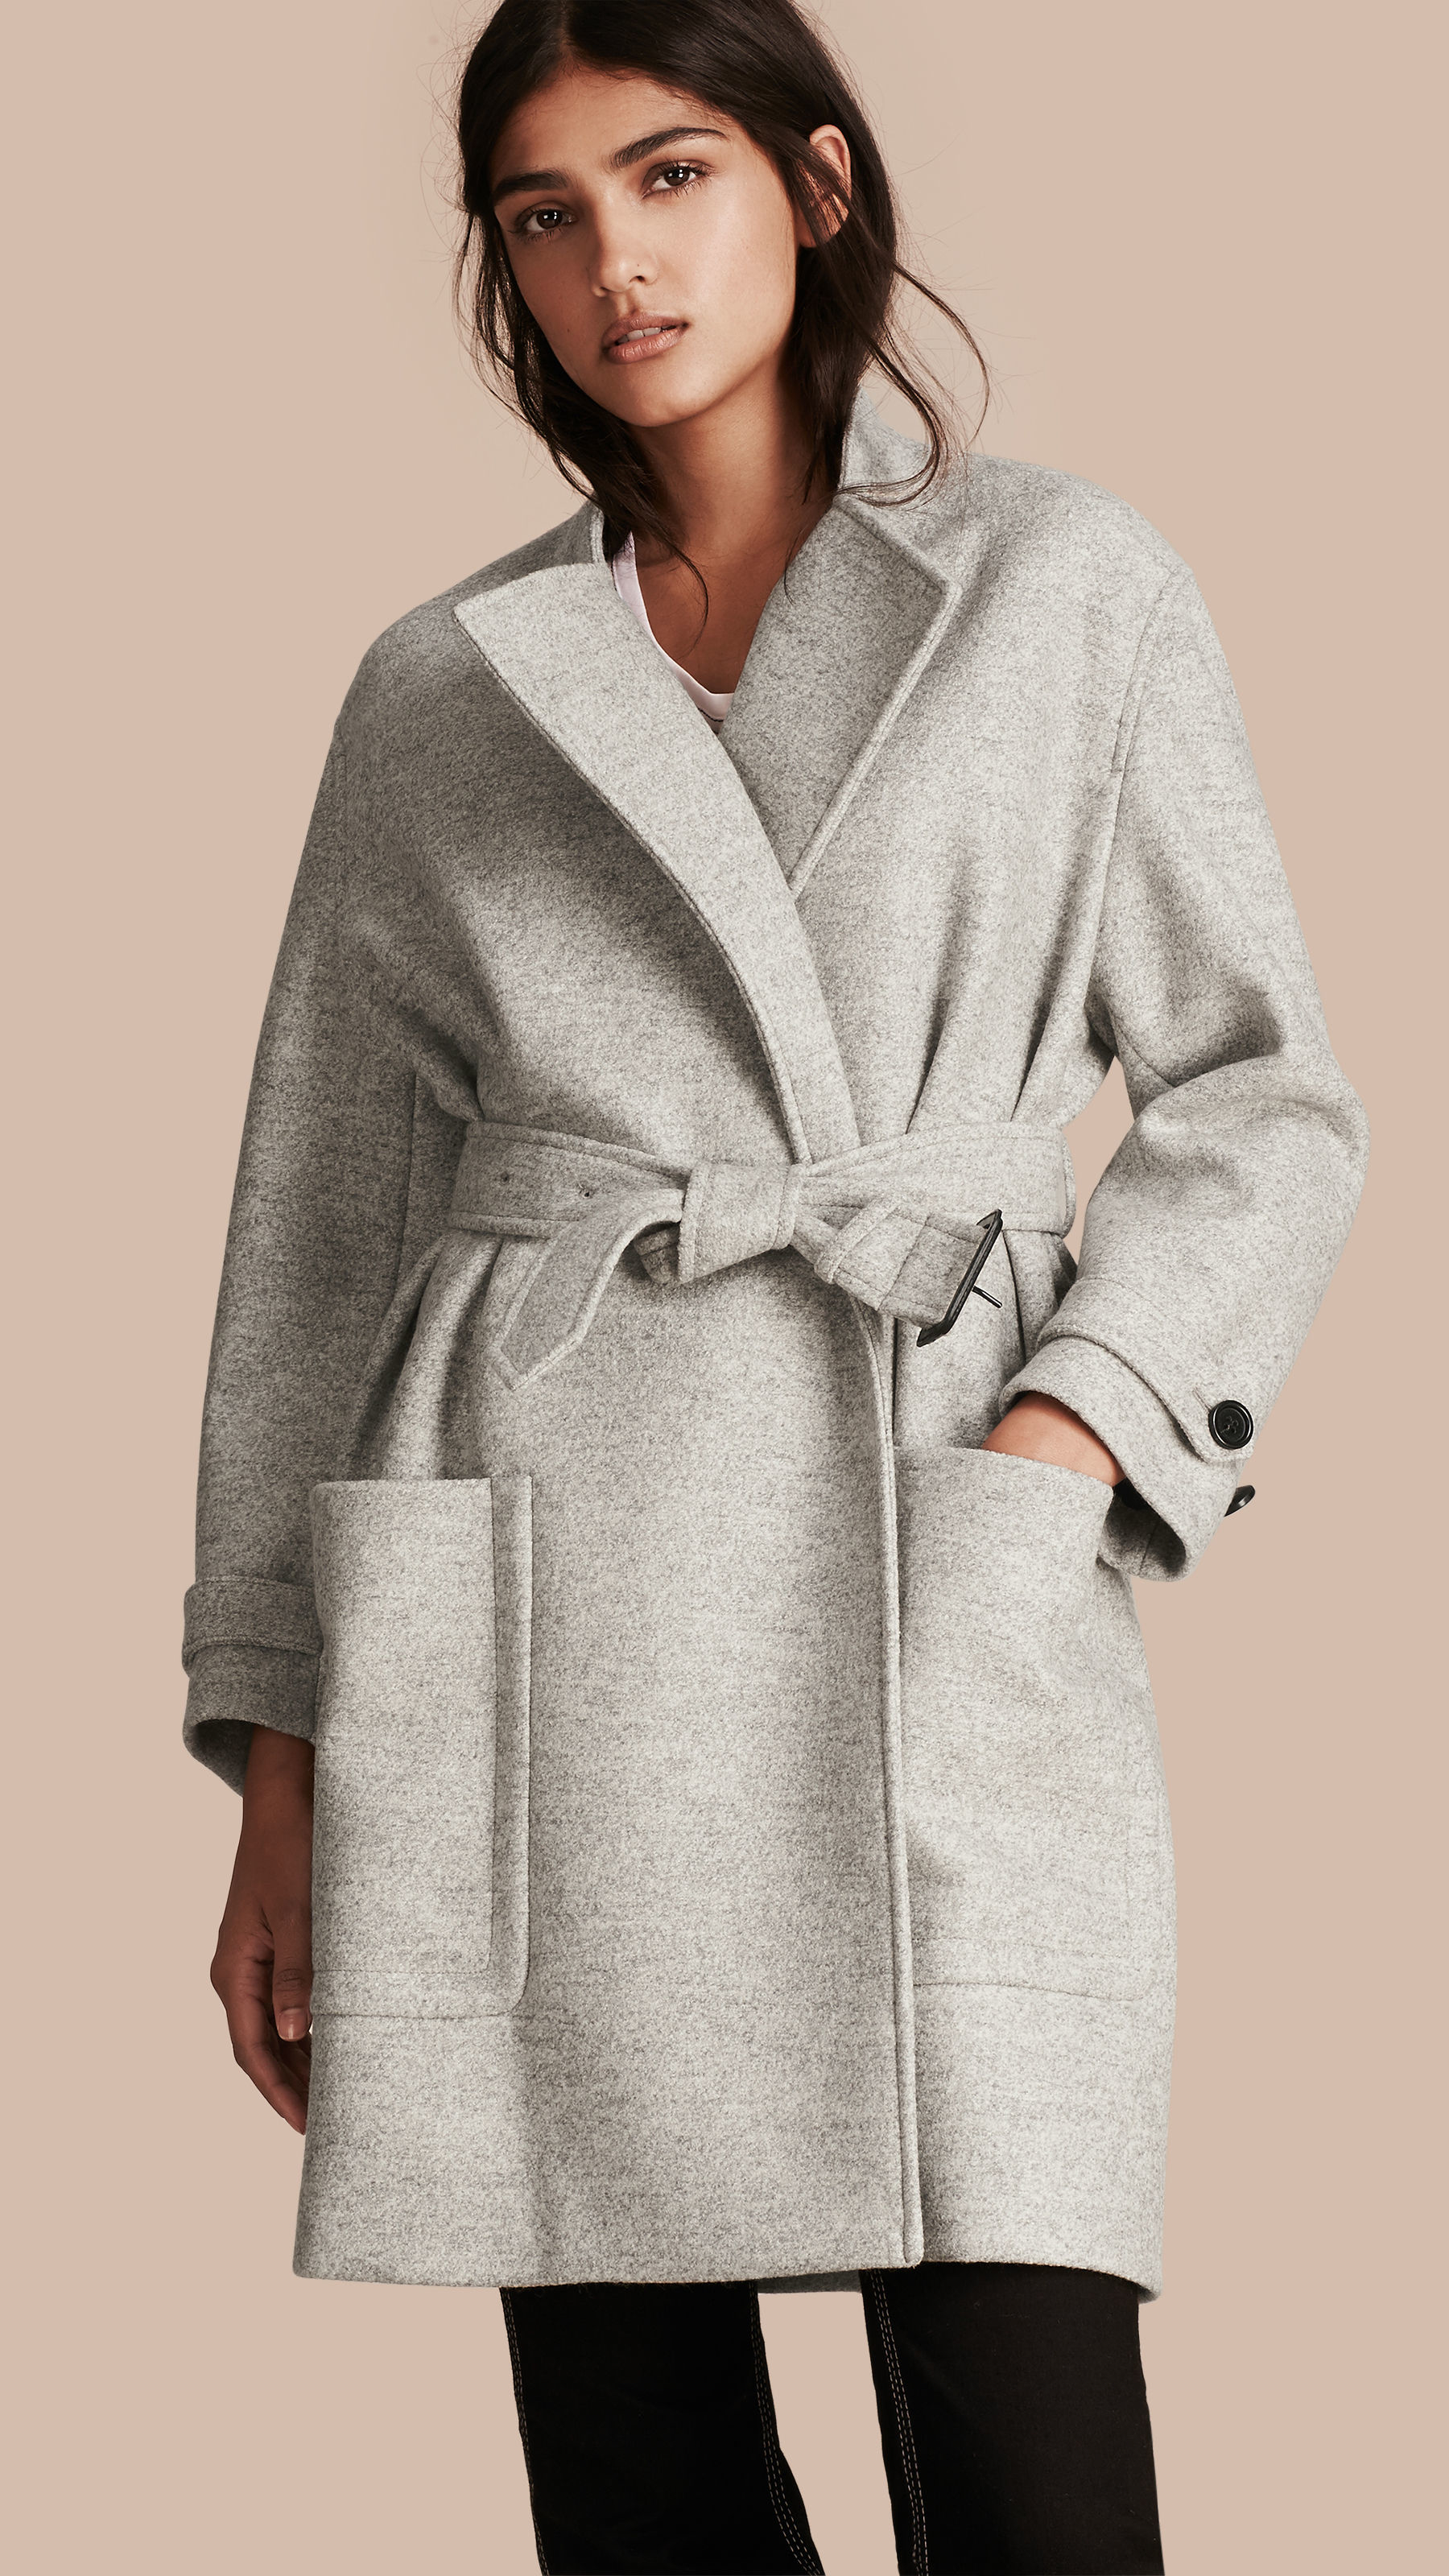 Lyst - Burberry Wool Belted Wrap Coat in Gray